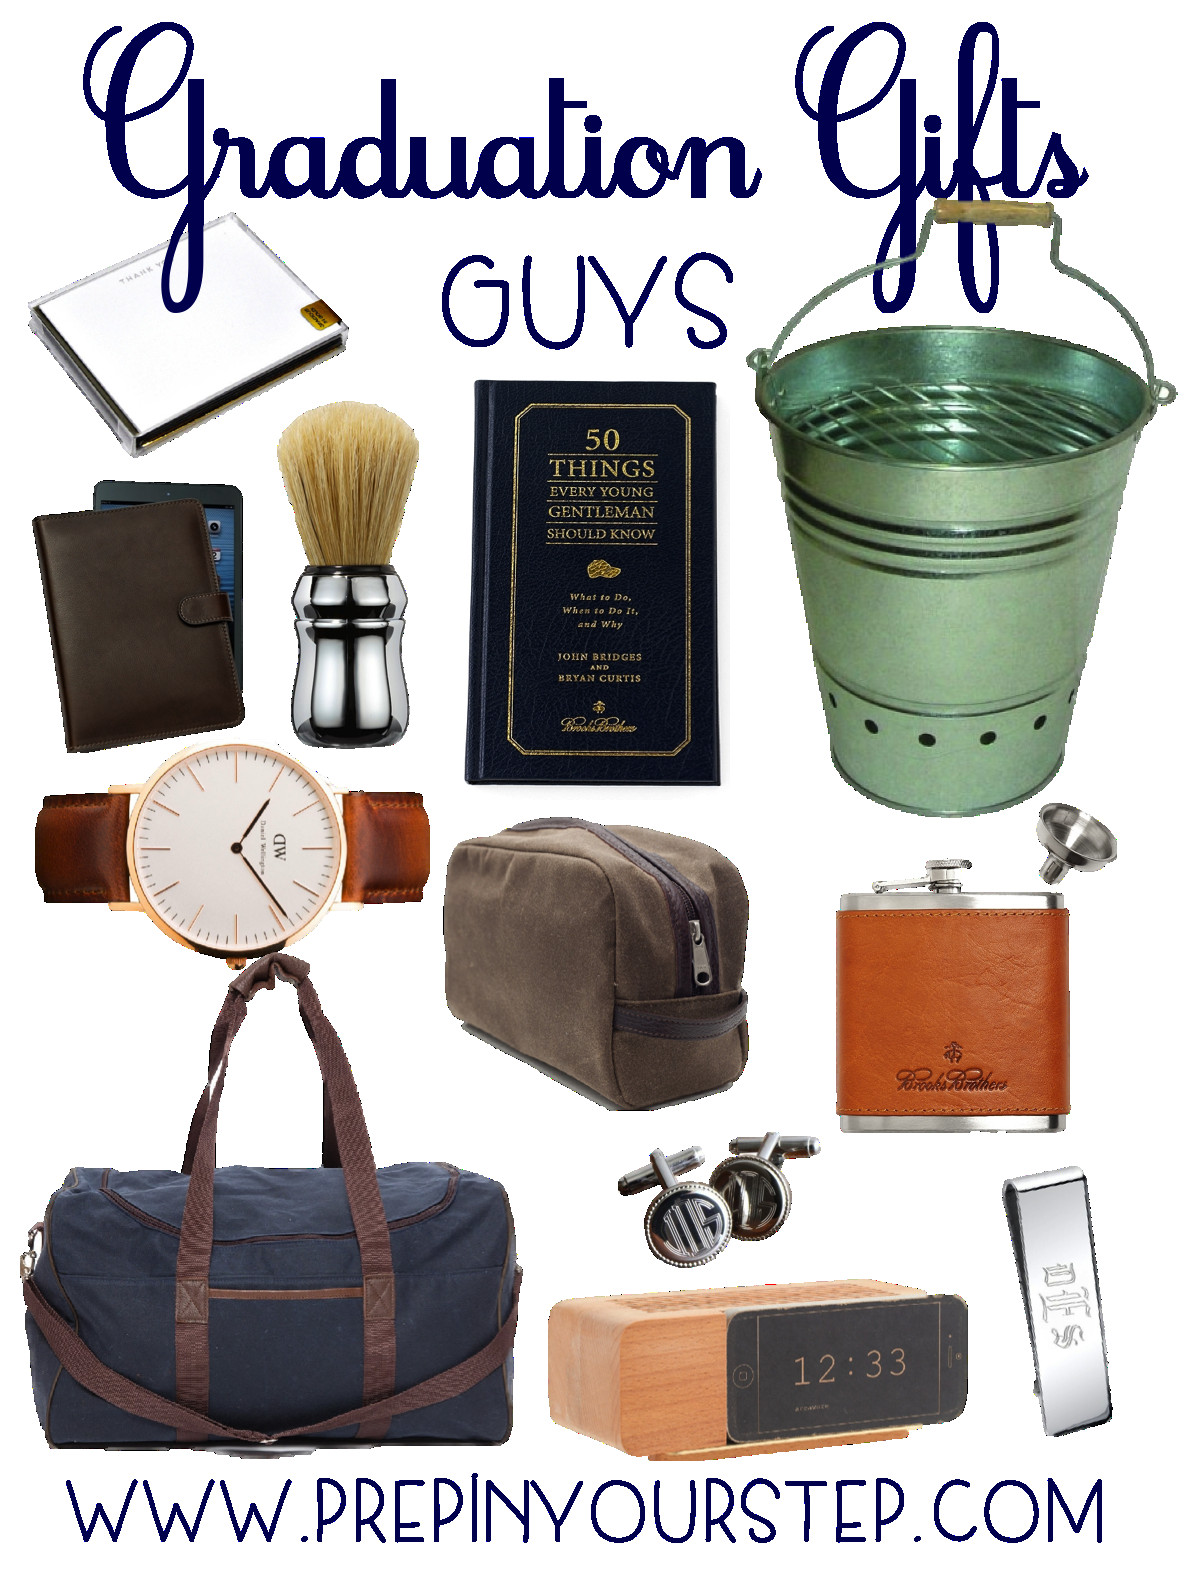 Graduation Gift Ideas For Male College Graduates
 Graduation Gift Ideas Guys & Girls Prep In Your Step